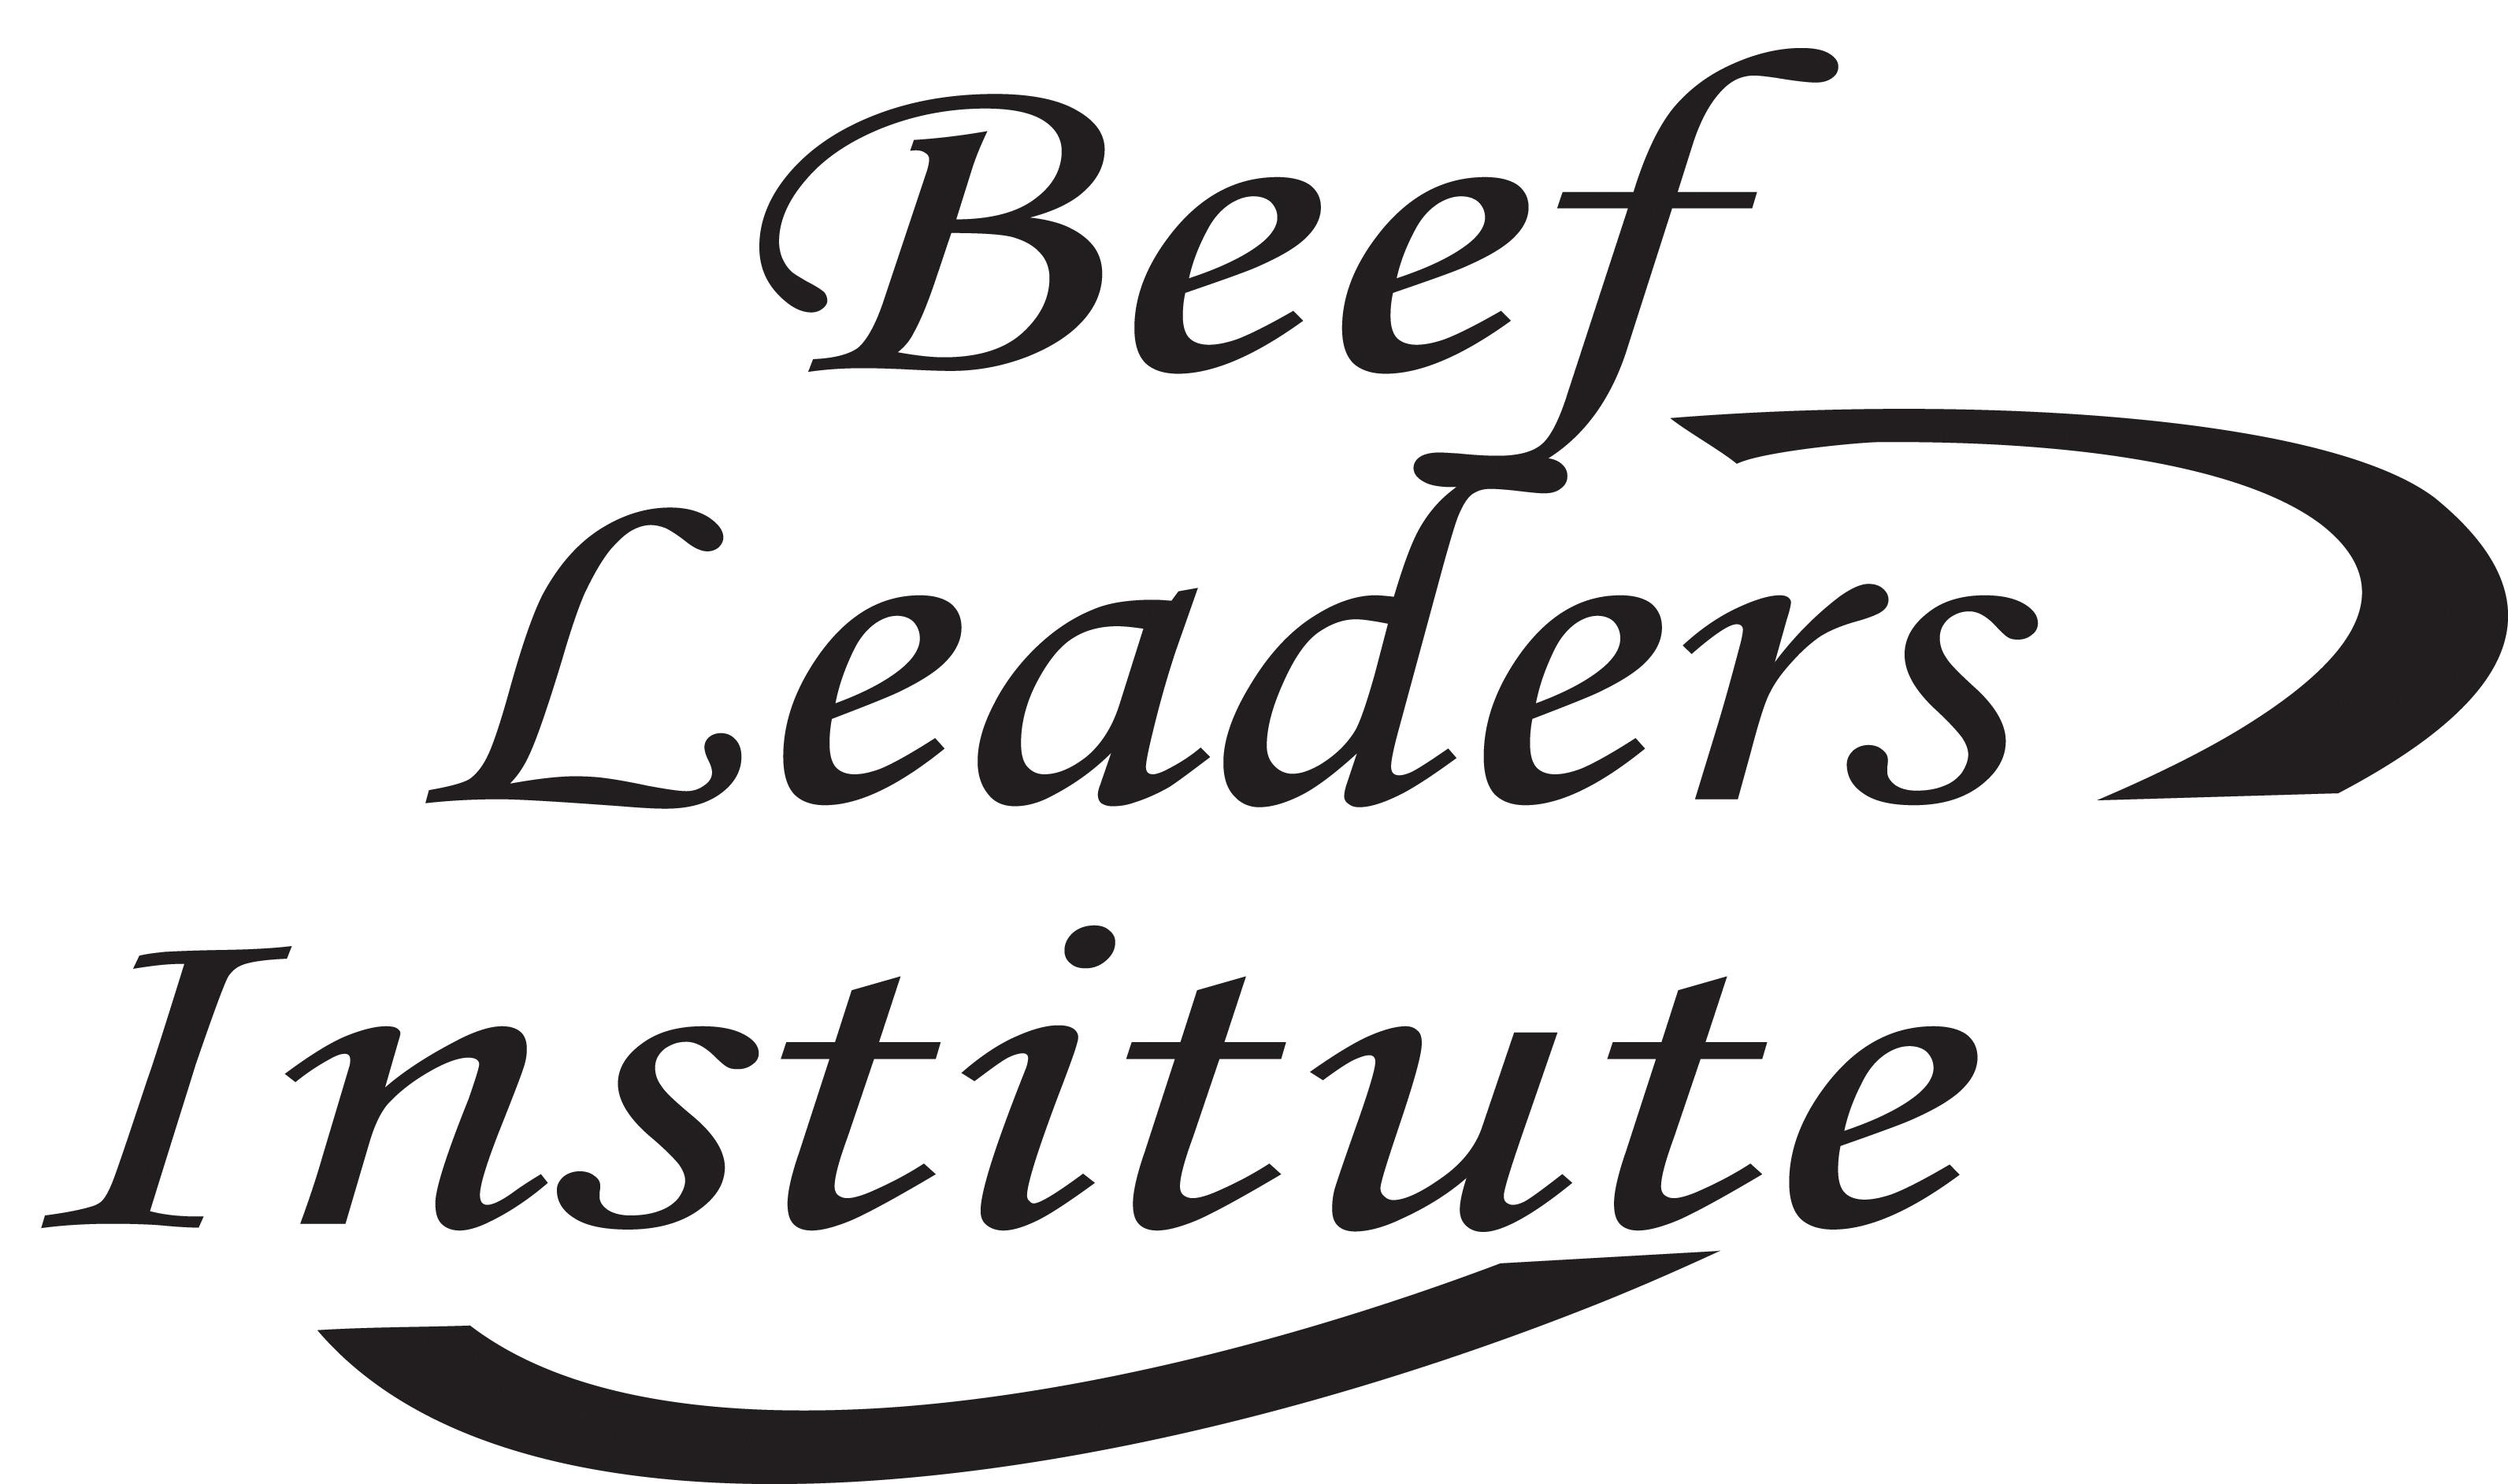 Young Angus Producers Jordan Cook and Jeremy Leister Represent OK at '17 Beef Leaders Institute